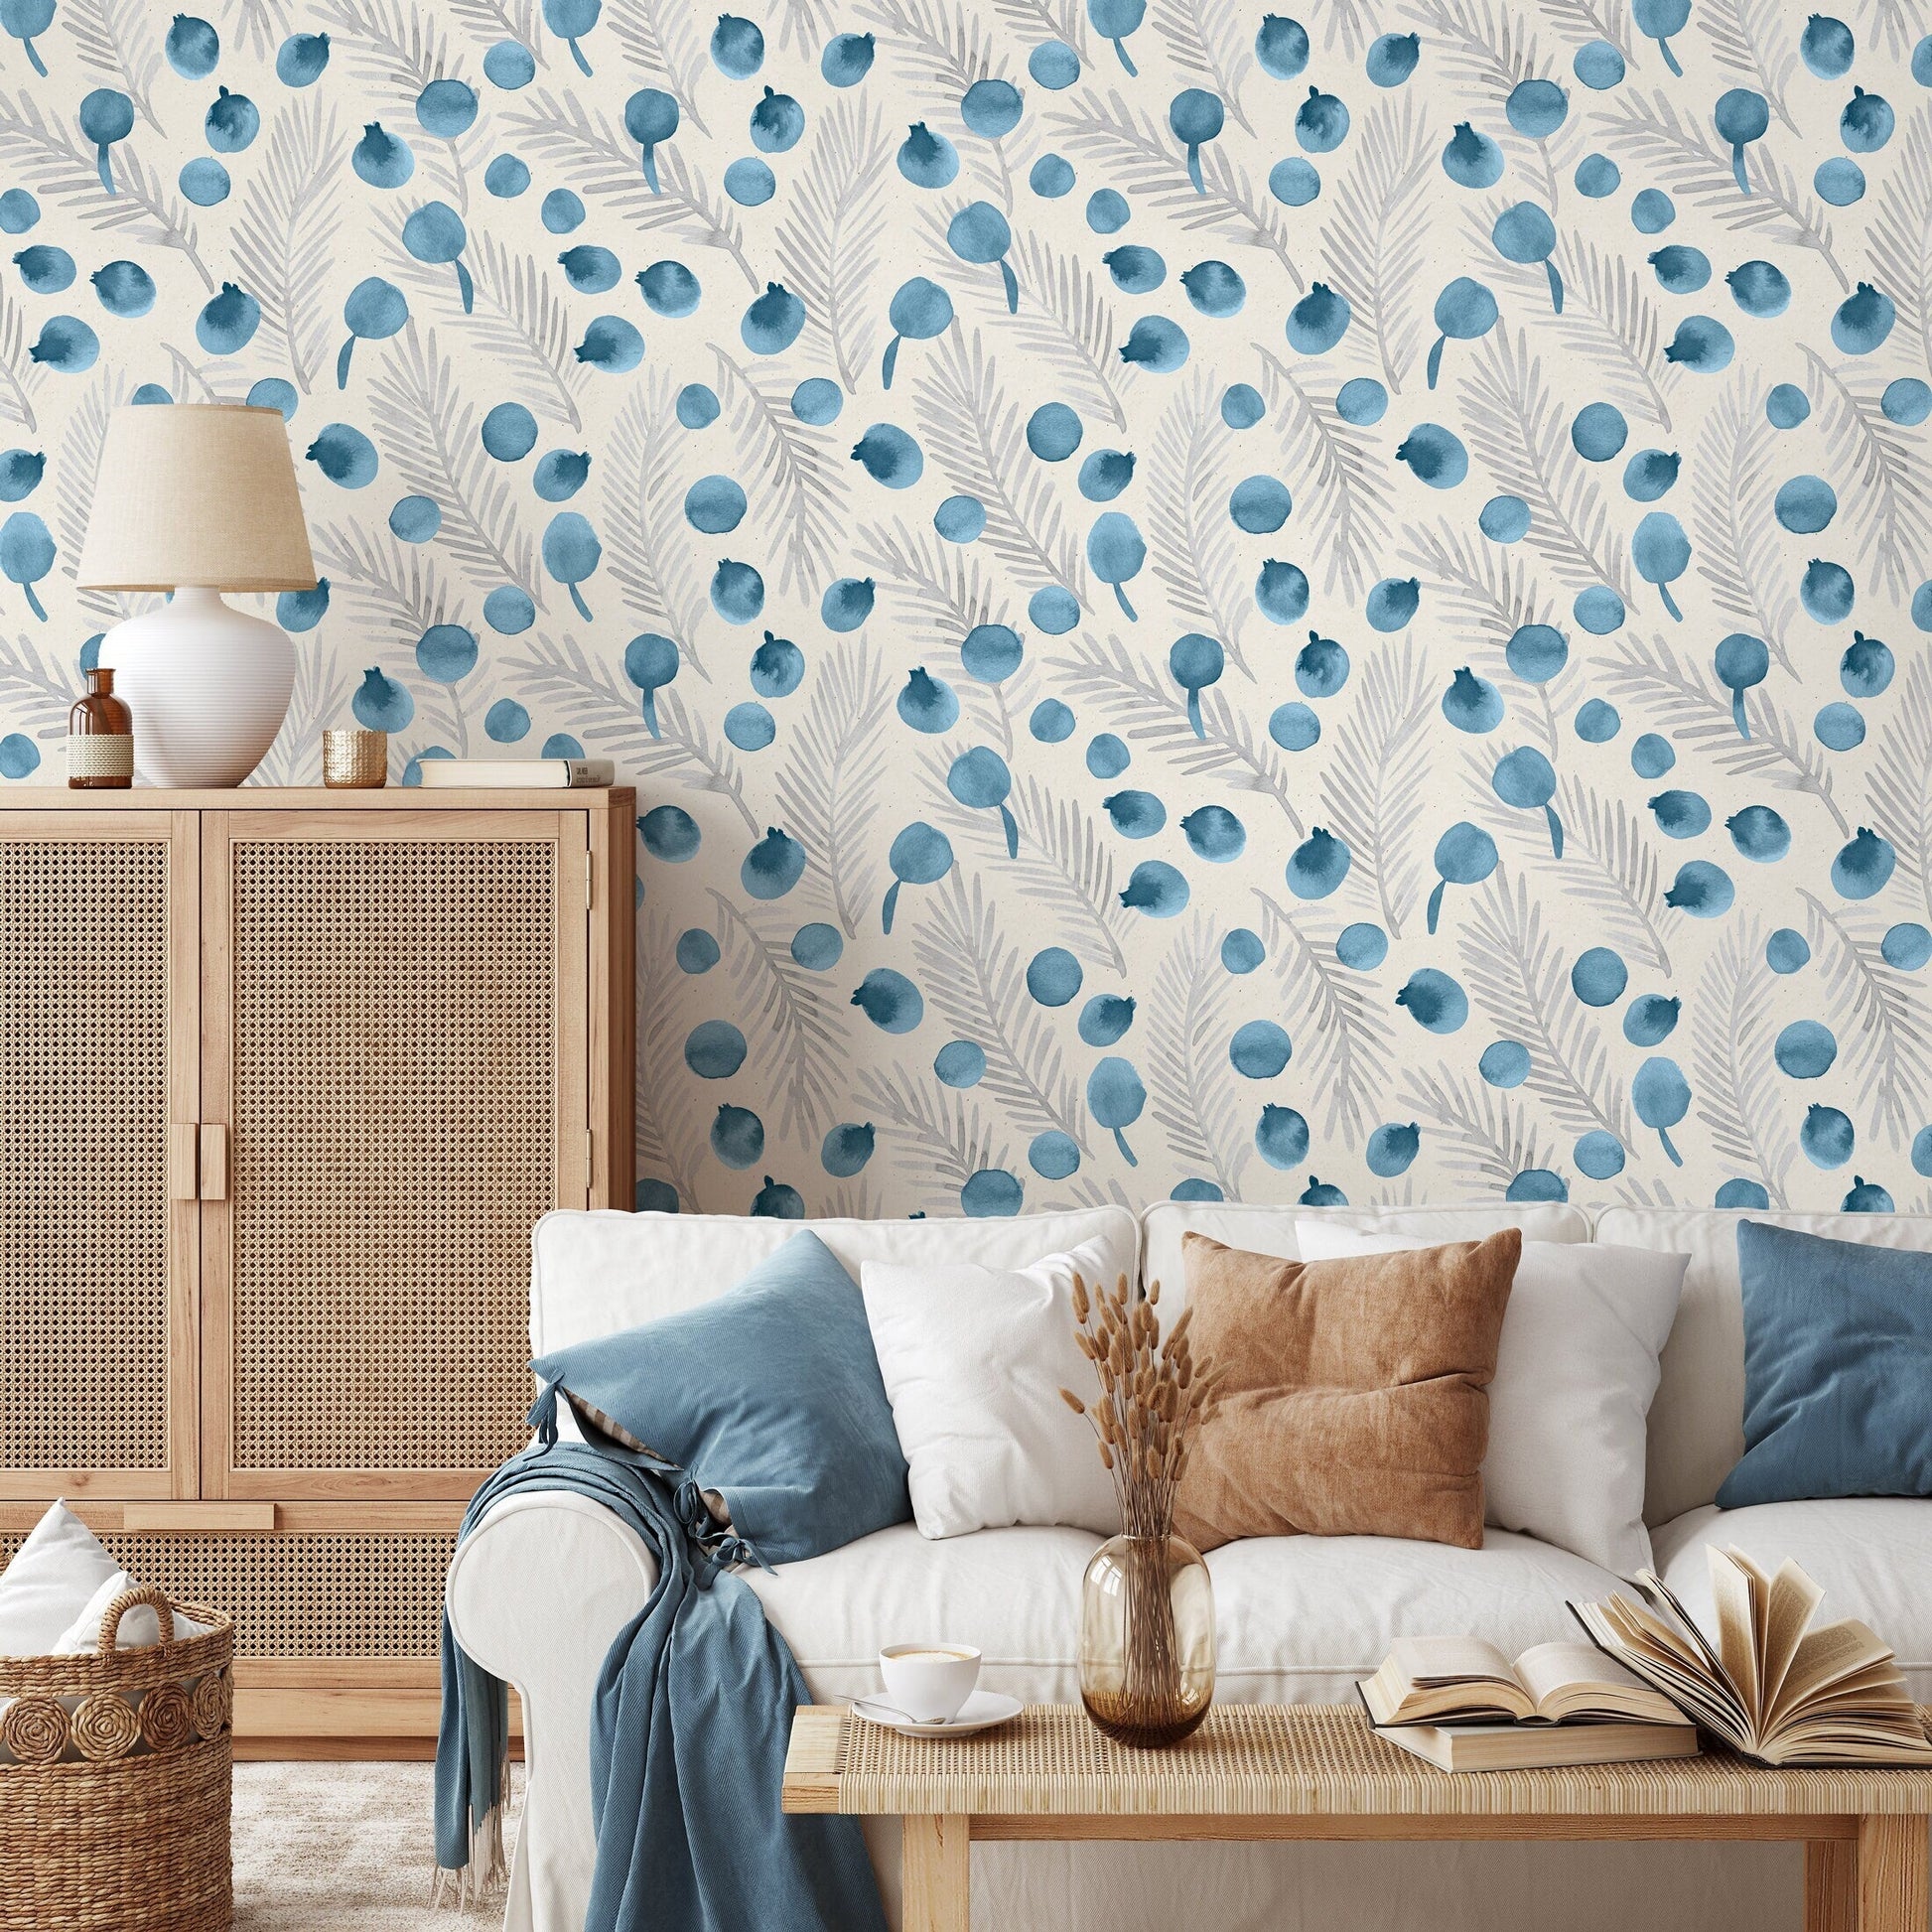 Feathers Wallpaper, Removable Wall Decor, Peel and Stick Wallpaper, Peacock Wallpaper, Removable, Wall Paper Removable, Wallpaper - A320